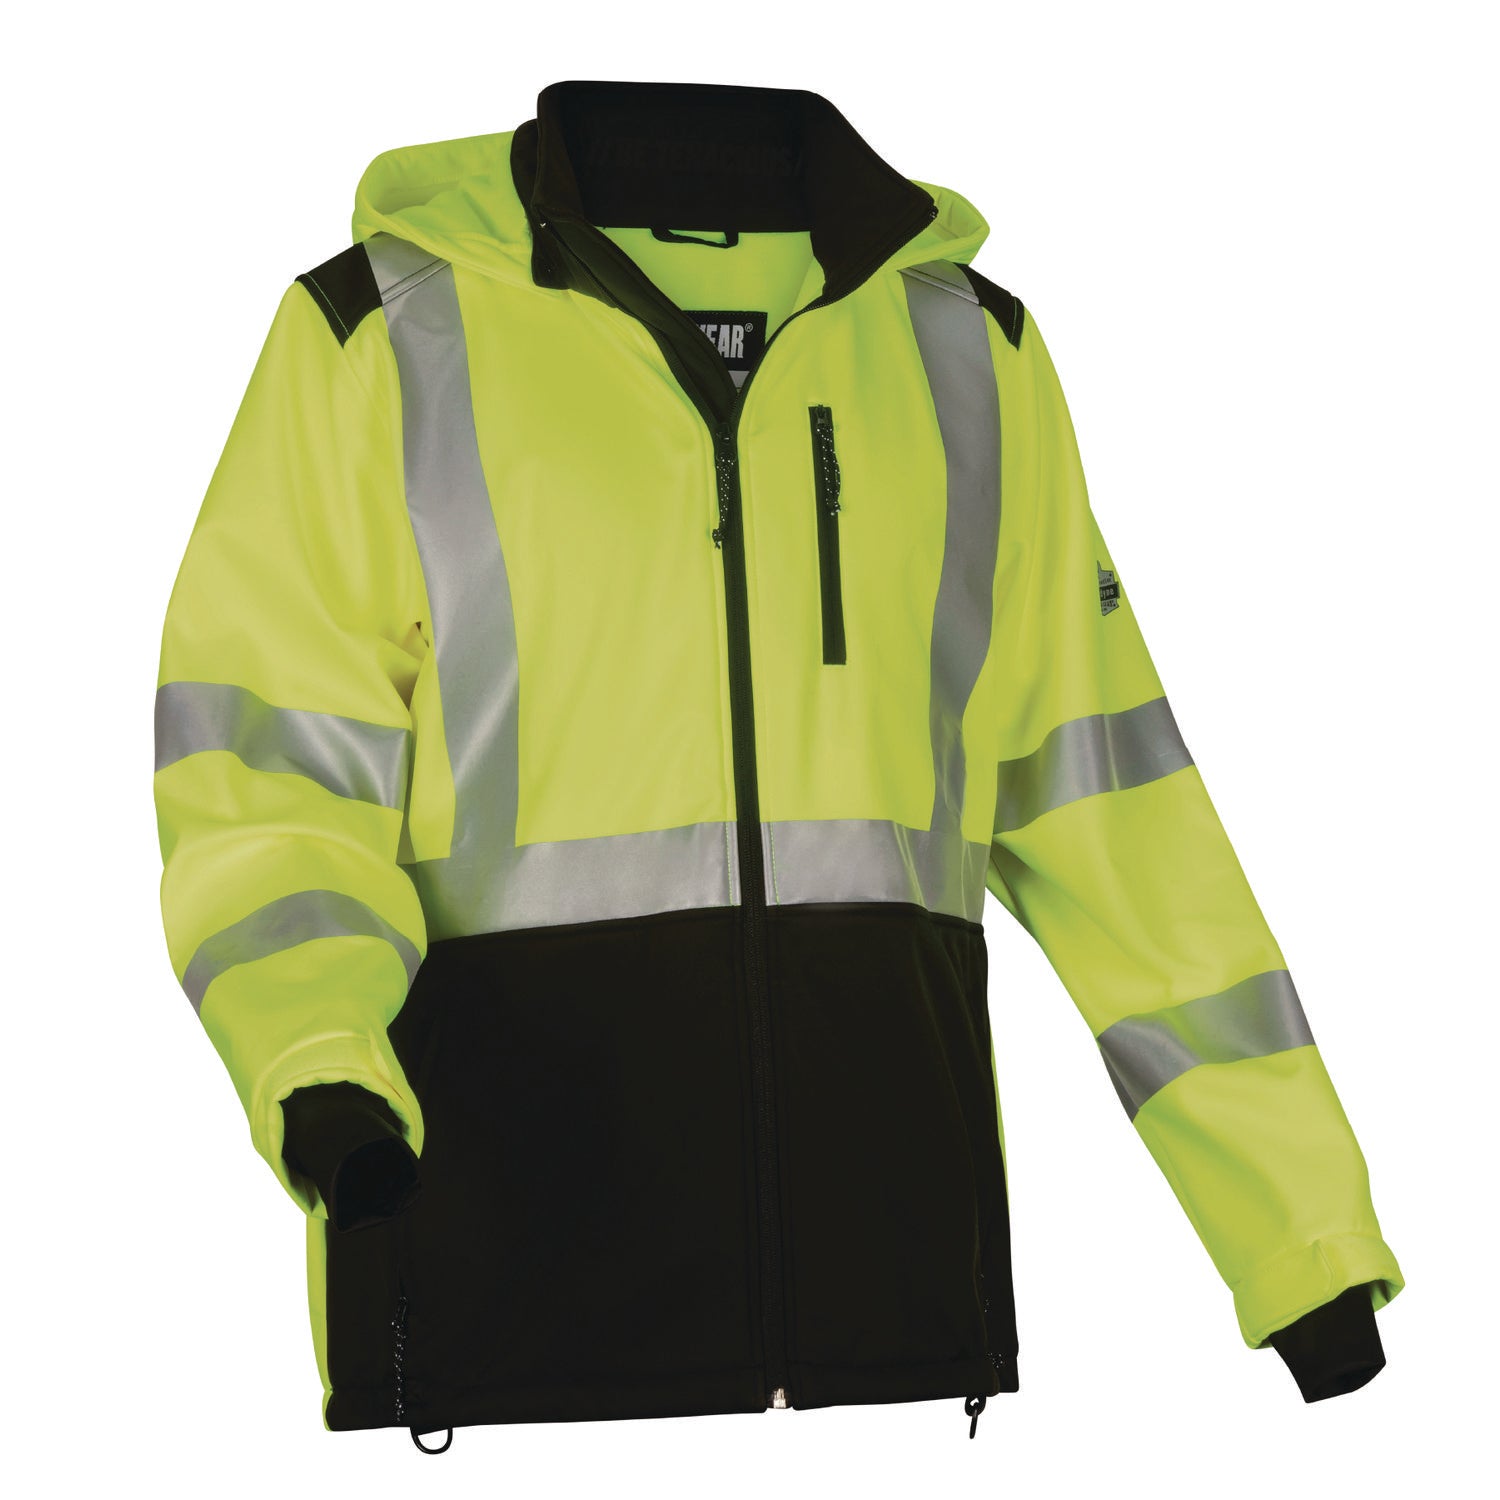 glowear-8353-class-3-hi-vis-softshell-water-resistant-jacket-3x-large-lime-ships-in-1-3-business-days_ego23527 - 1